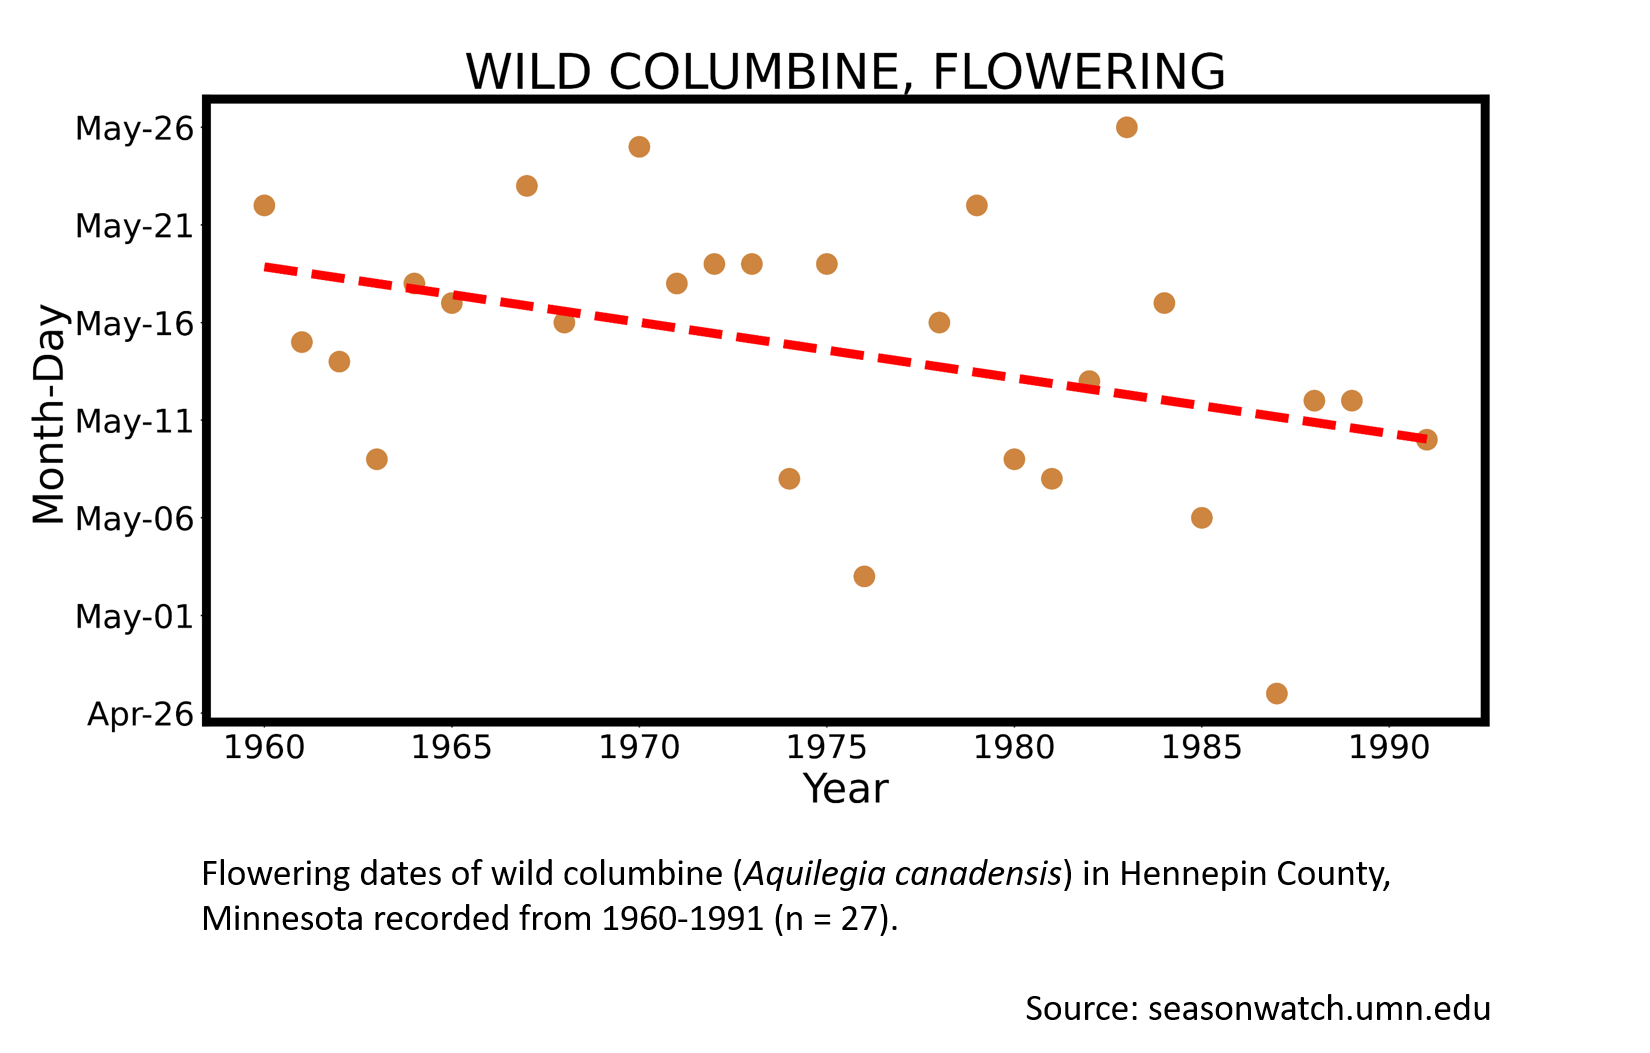 Scatterplot showing red columbine phenology in Hennepin County, Minnesota